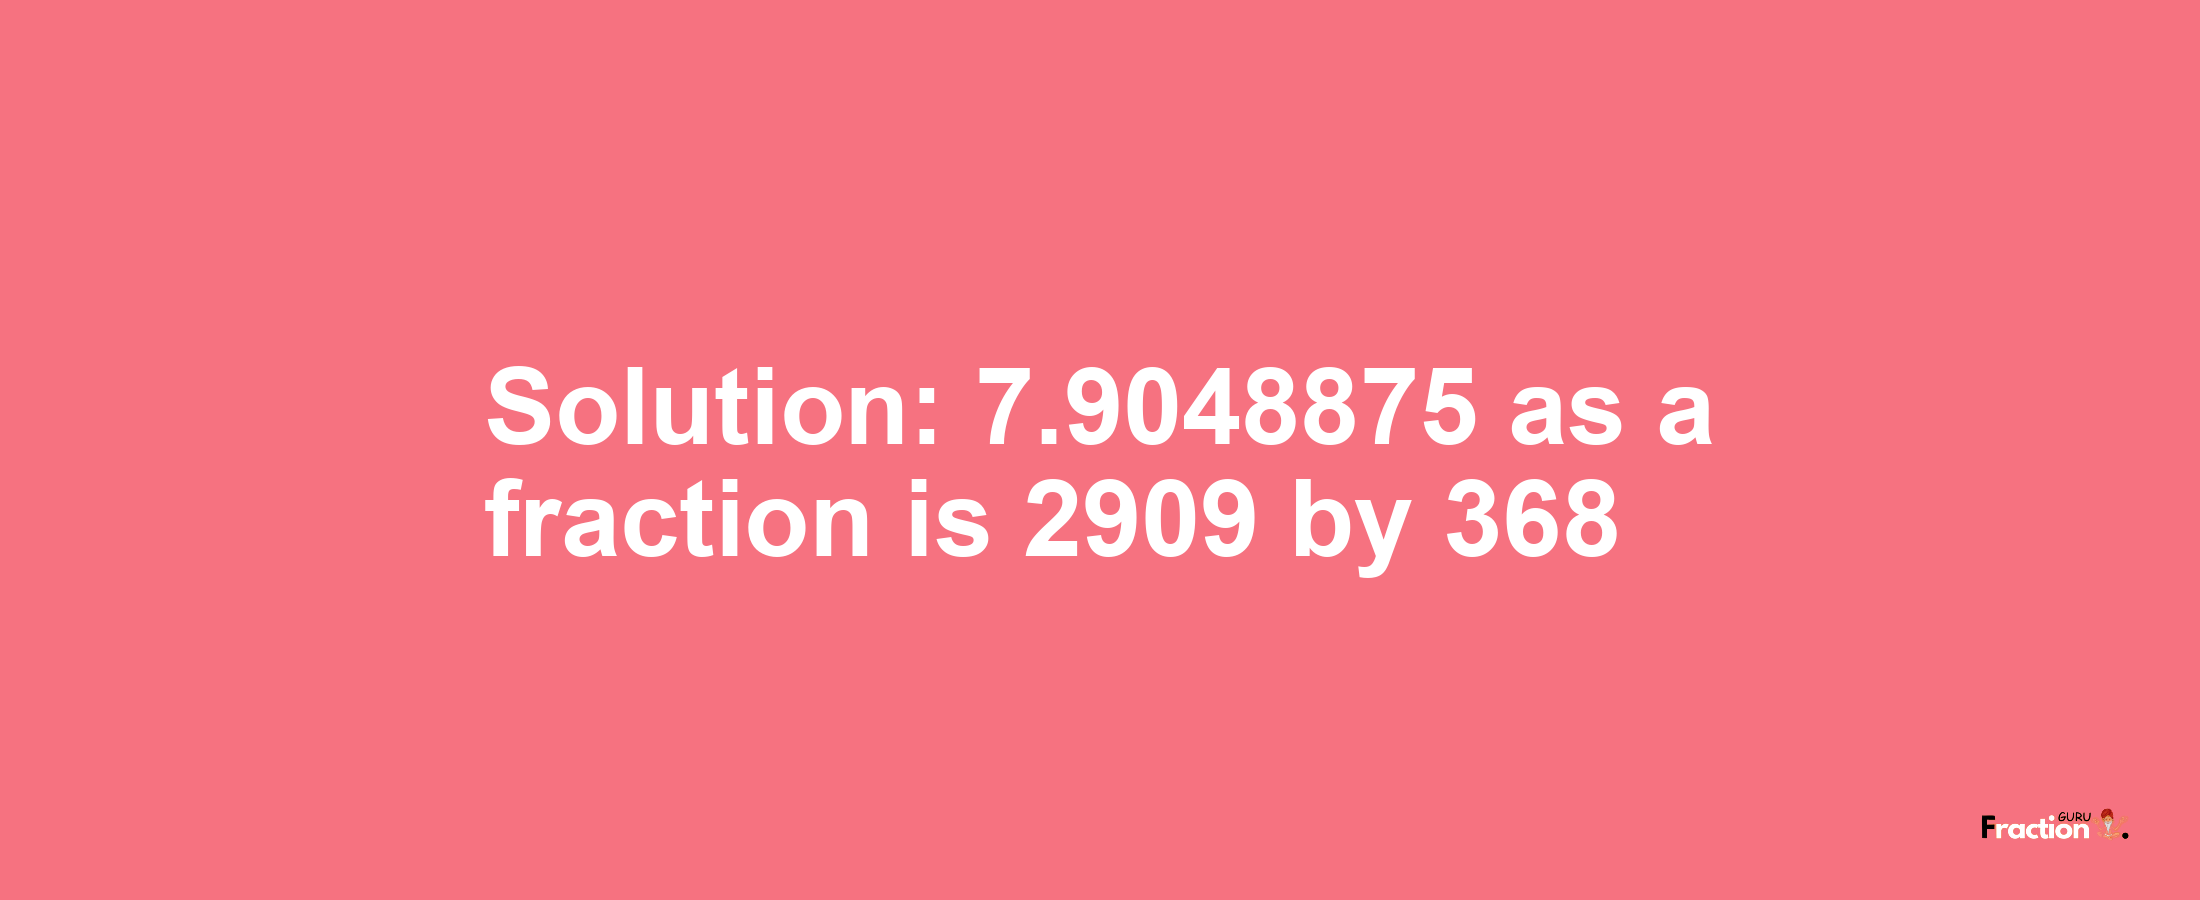 Solution:7.9048875 as a fraction is 2909/368